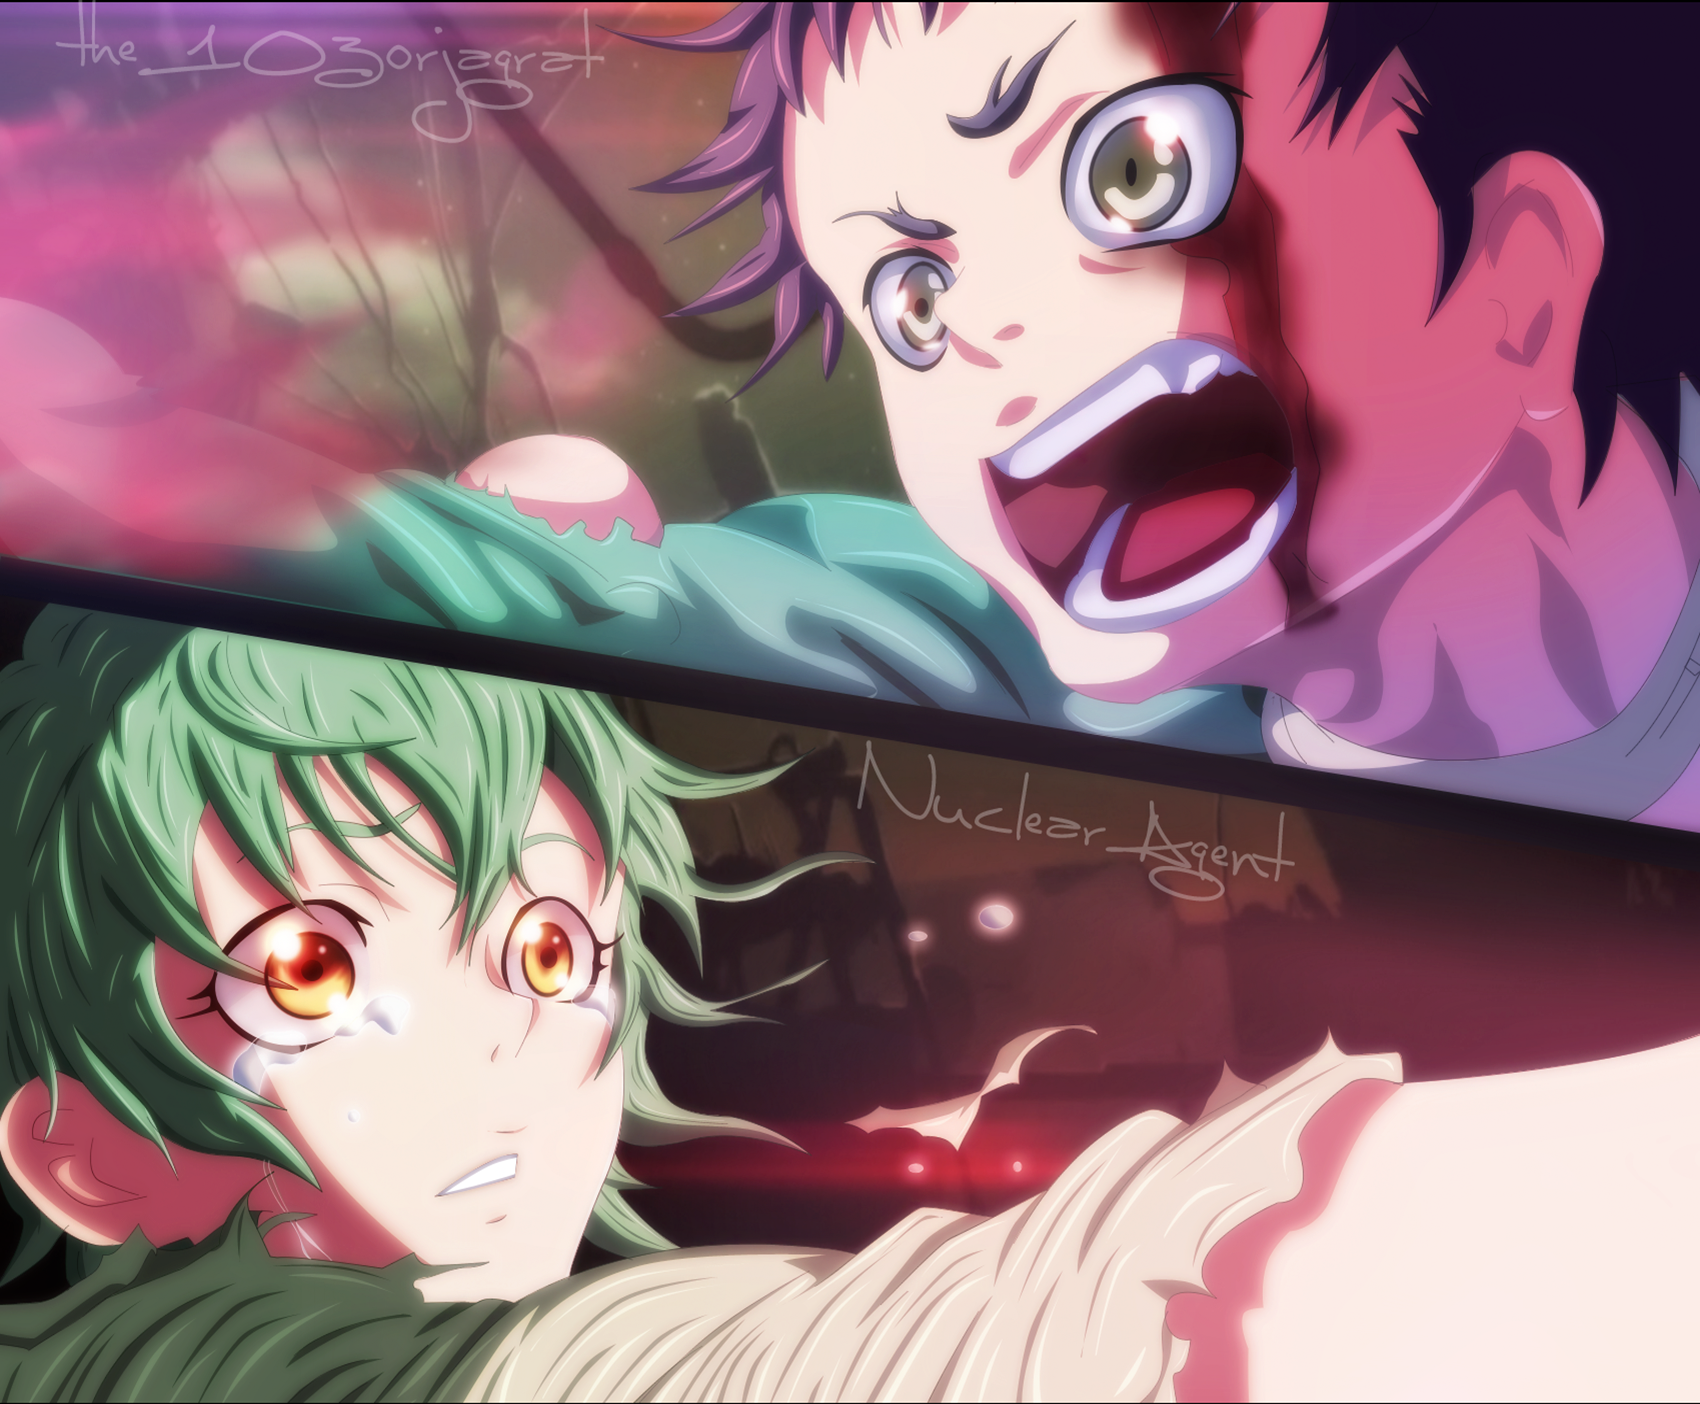 Ganta and Toto by Nuclear Agent